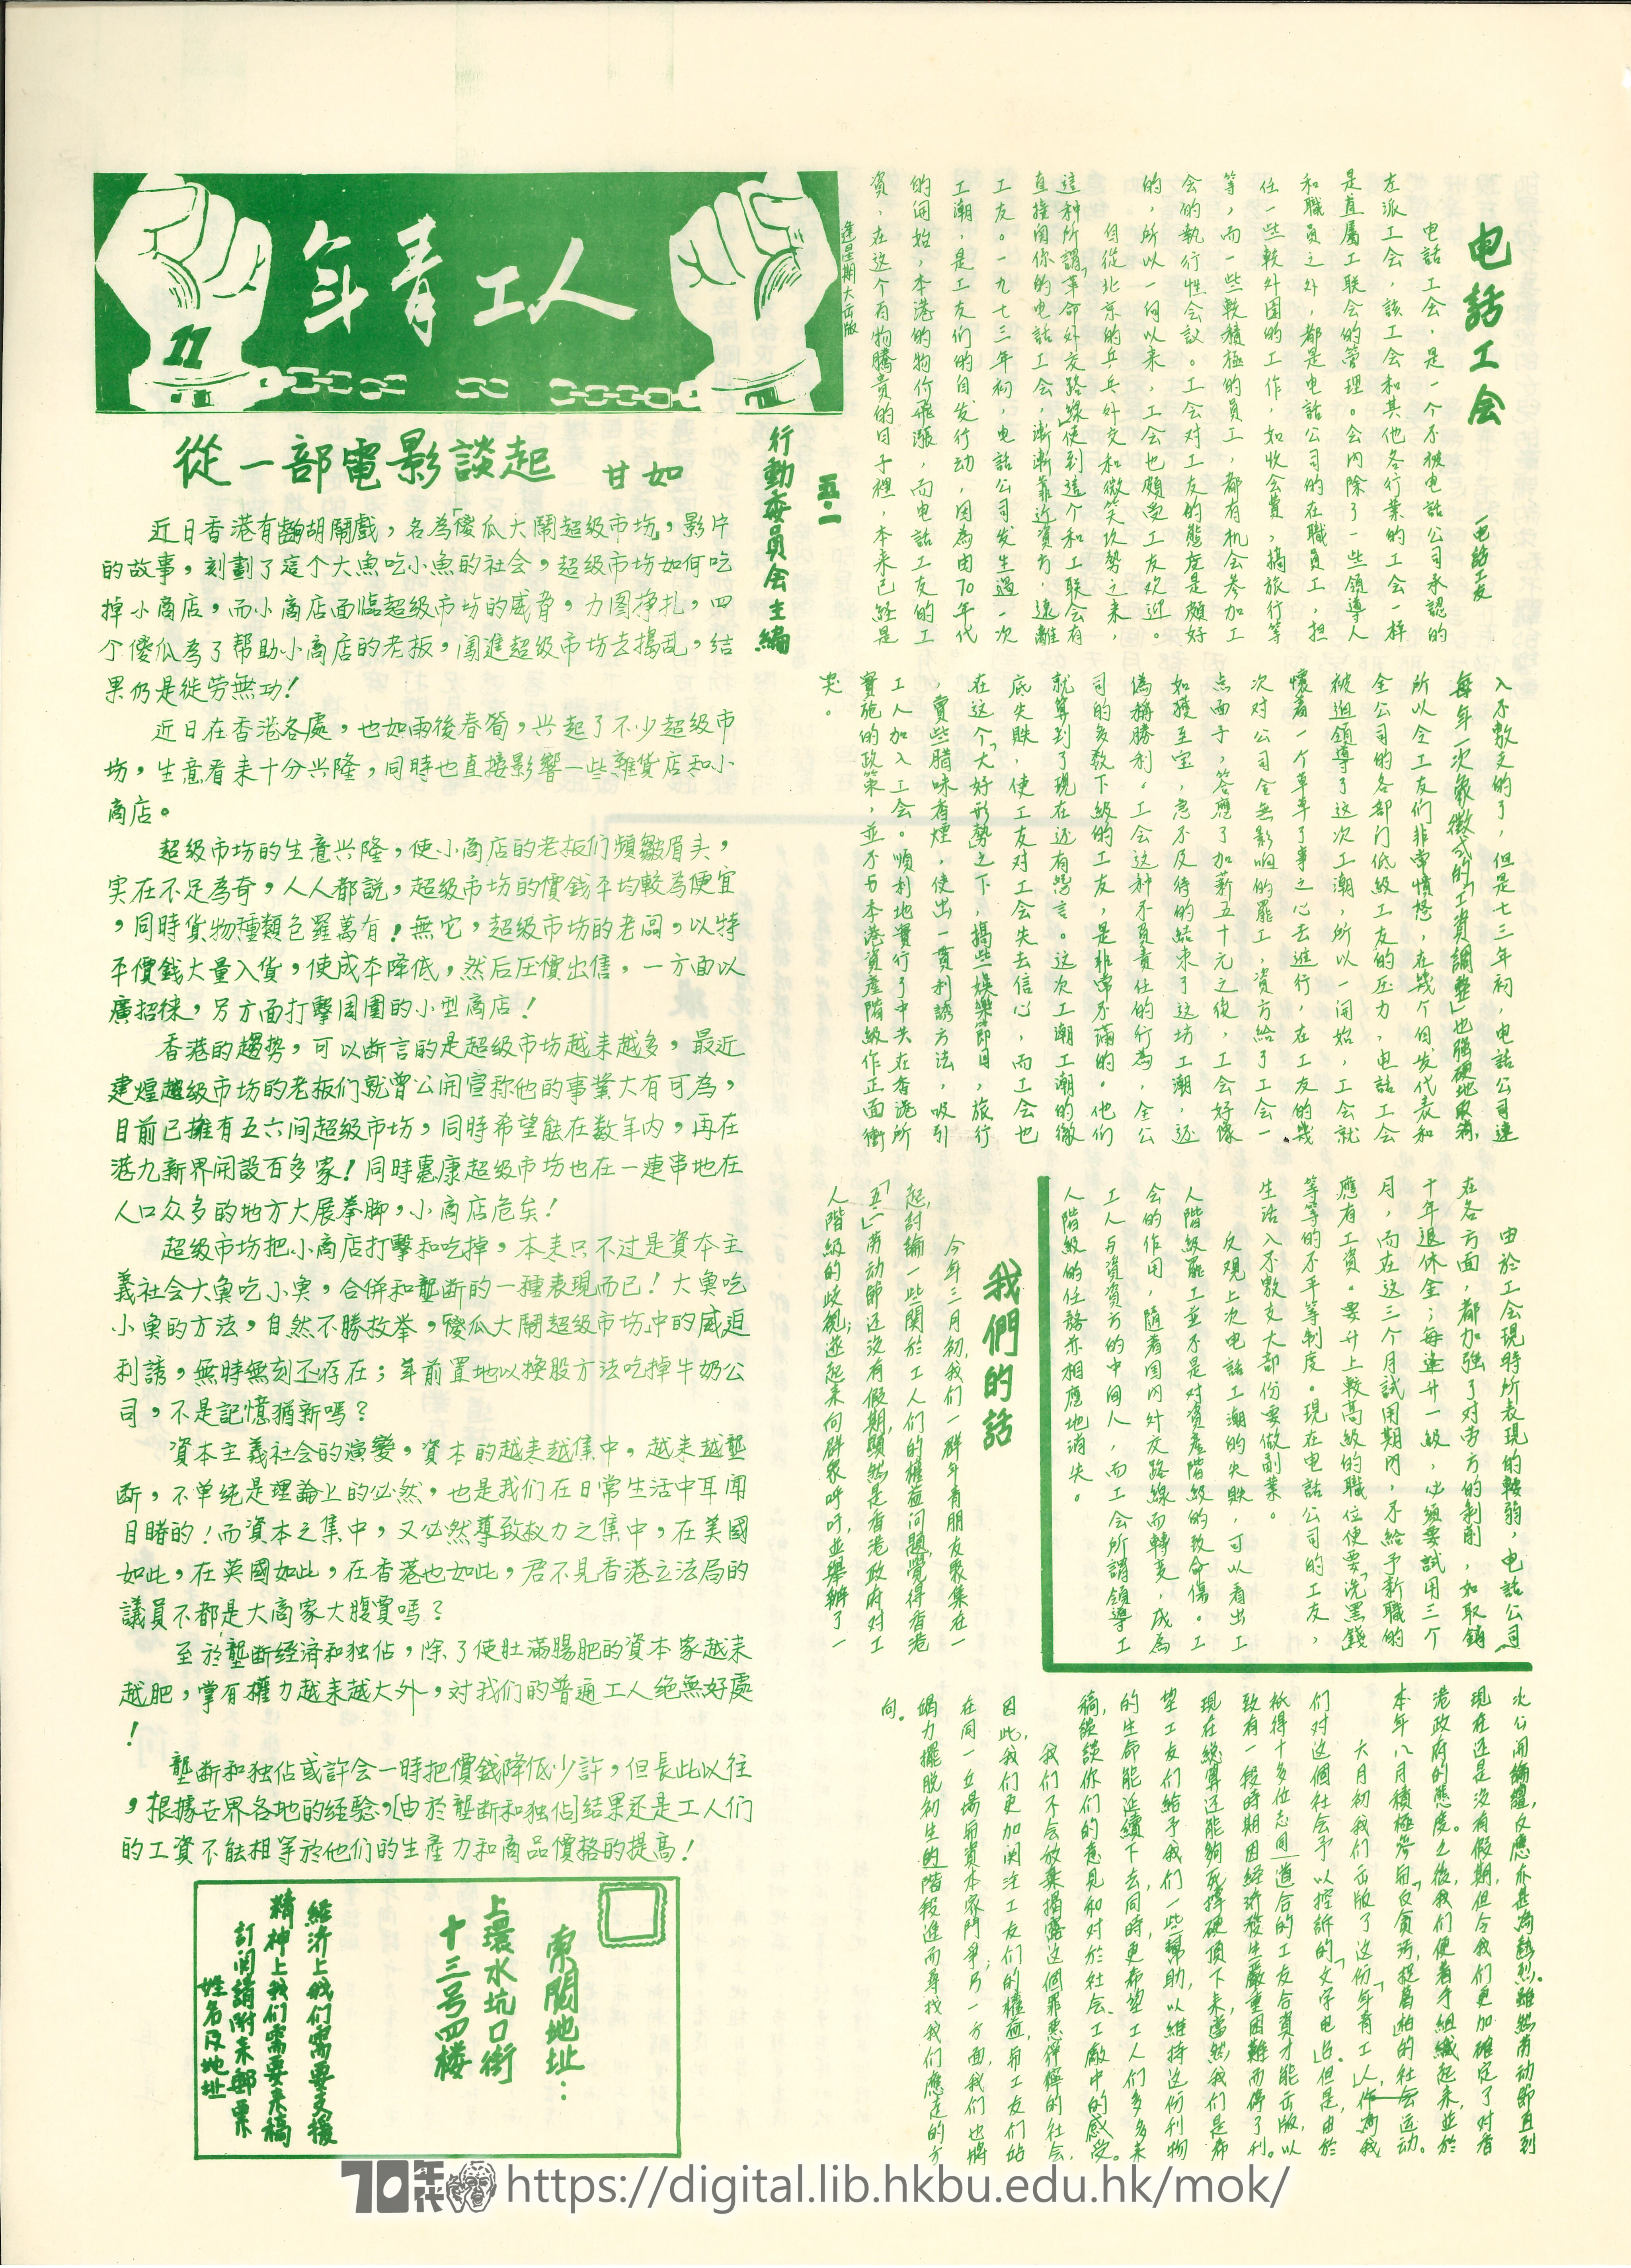  11 Telephone workers union 一電話工友 